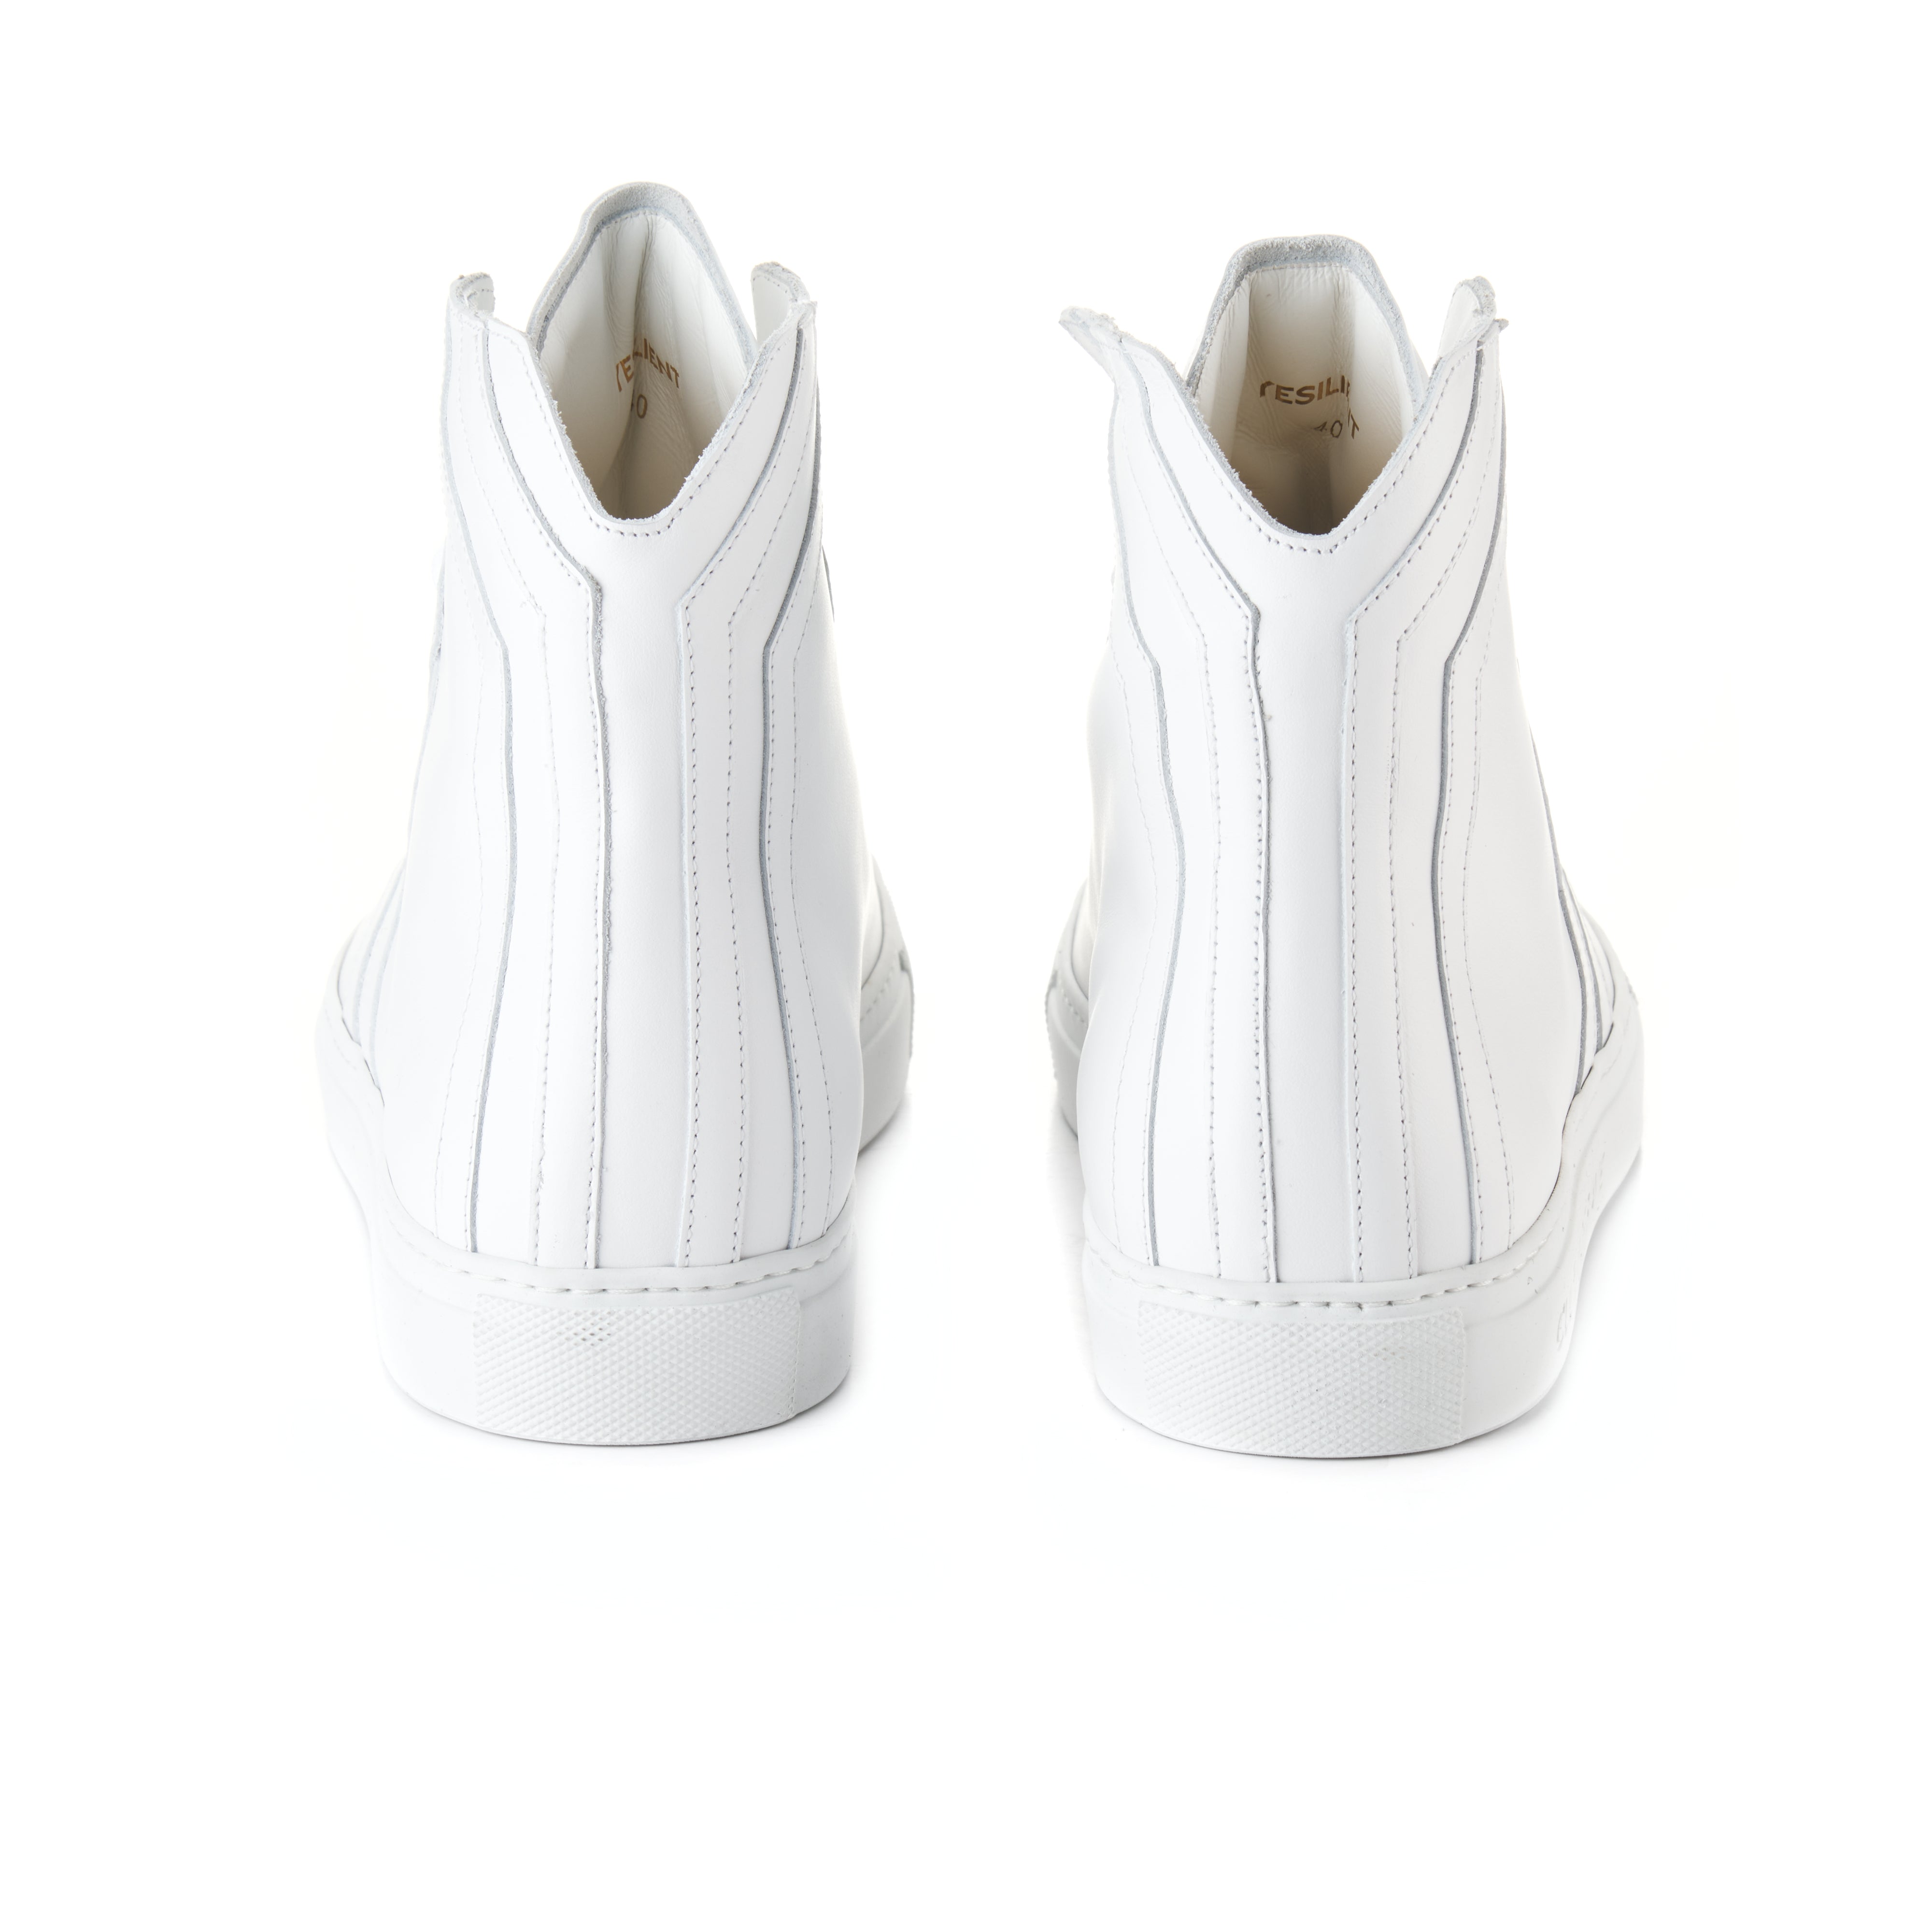 Resilient S13 Women White leather white wing mid cut